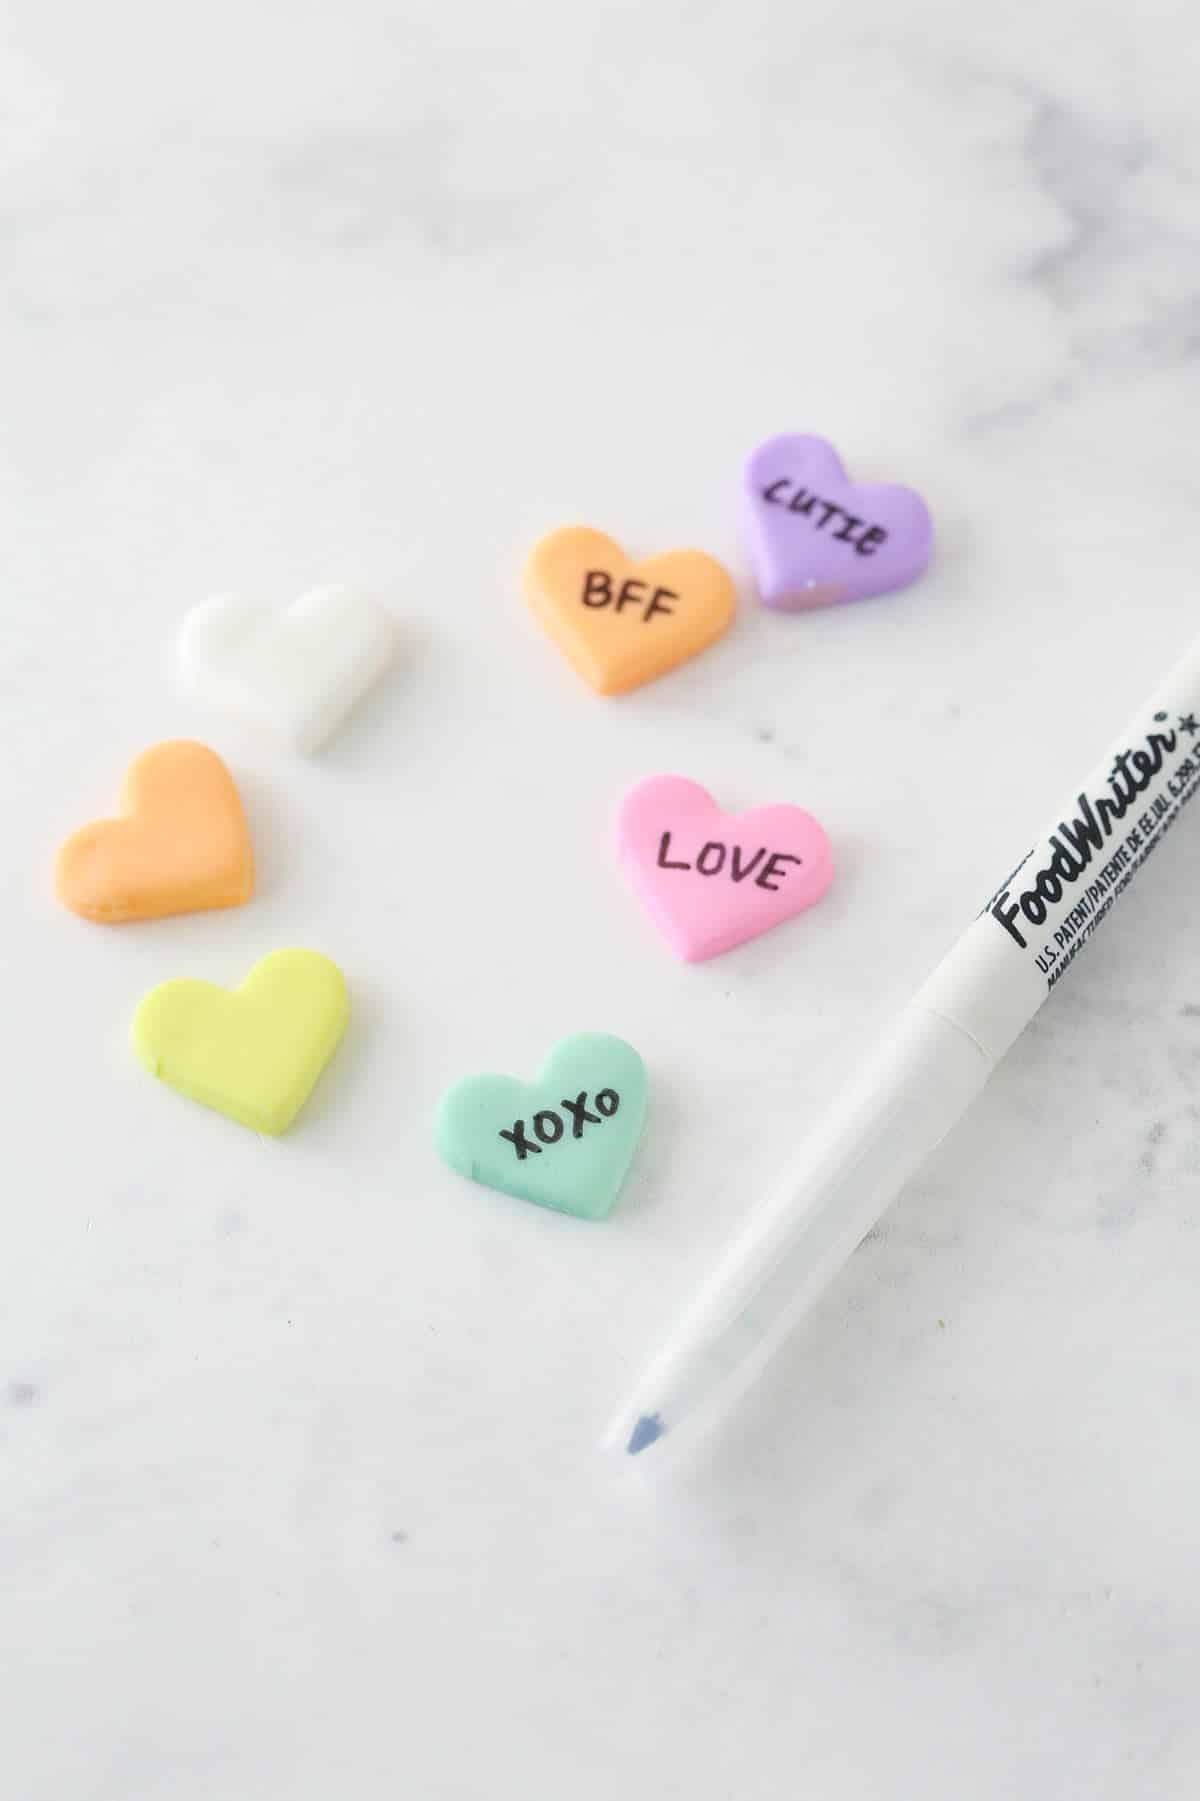 Writing love messages on fondant hearts to top conversation heart cupcakes.